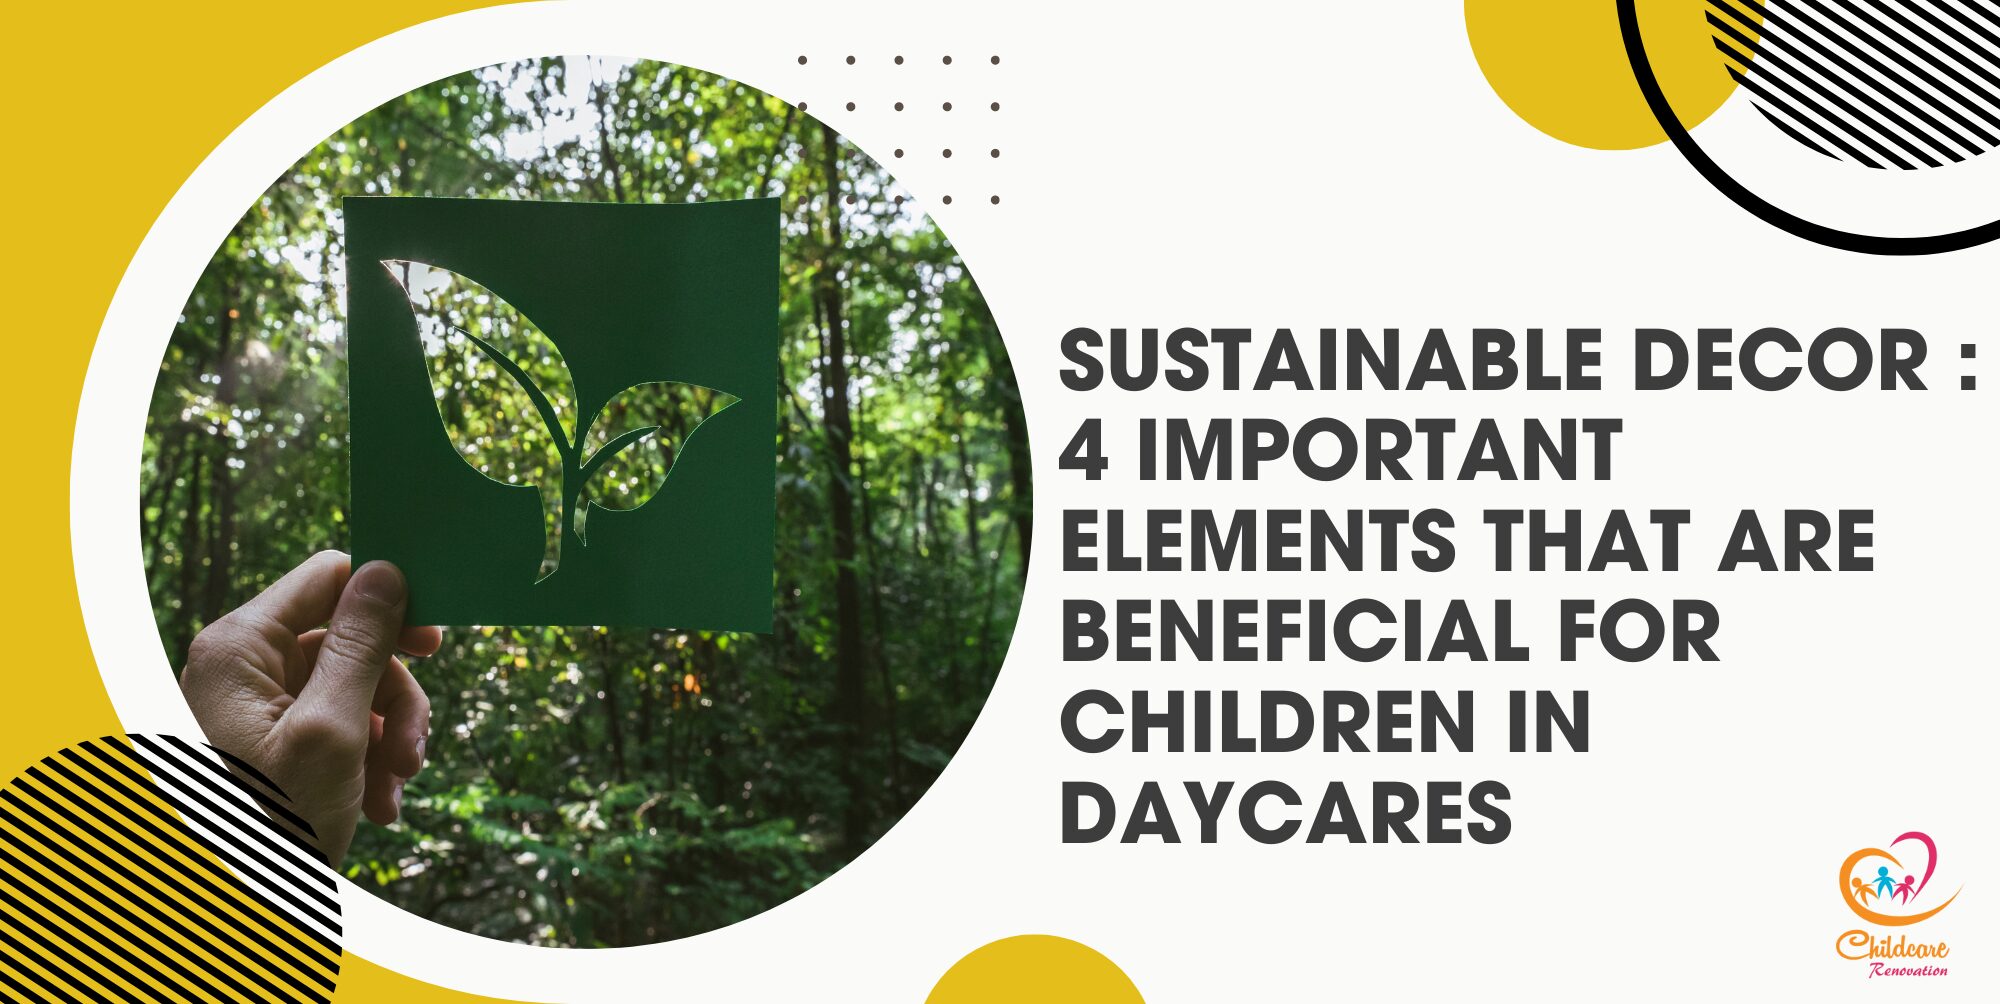 Sustainable Decor : 4 Important Elements that are Beneficial for Children in Daycares